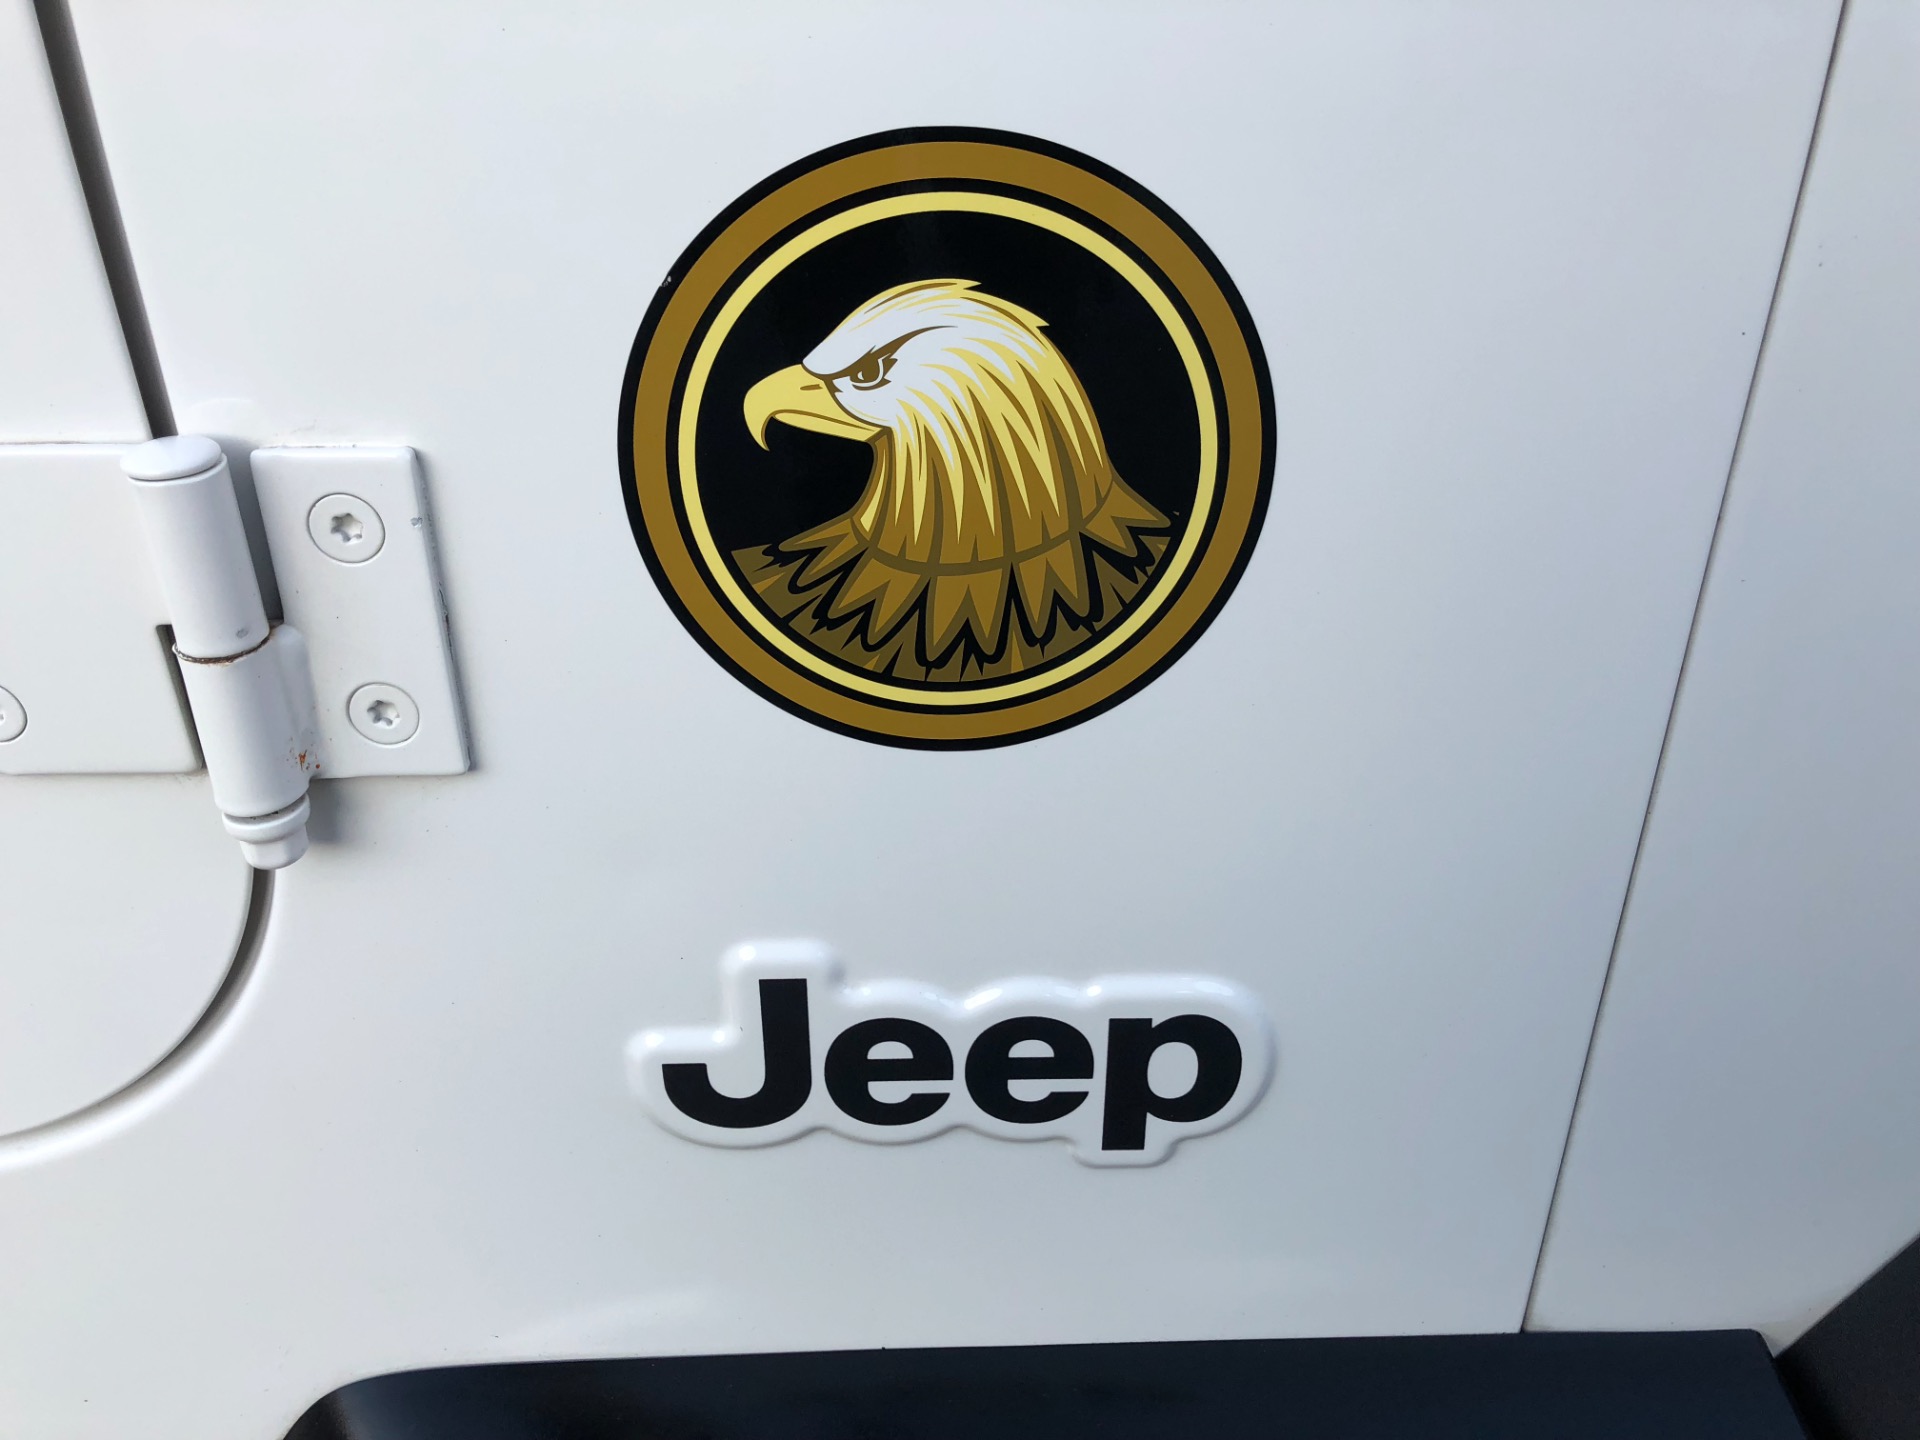 Used 2006 Jeep Wrangler Golden Eagle Sport For Sale (Special Pricing) |  Legend Leasing Stock #2736